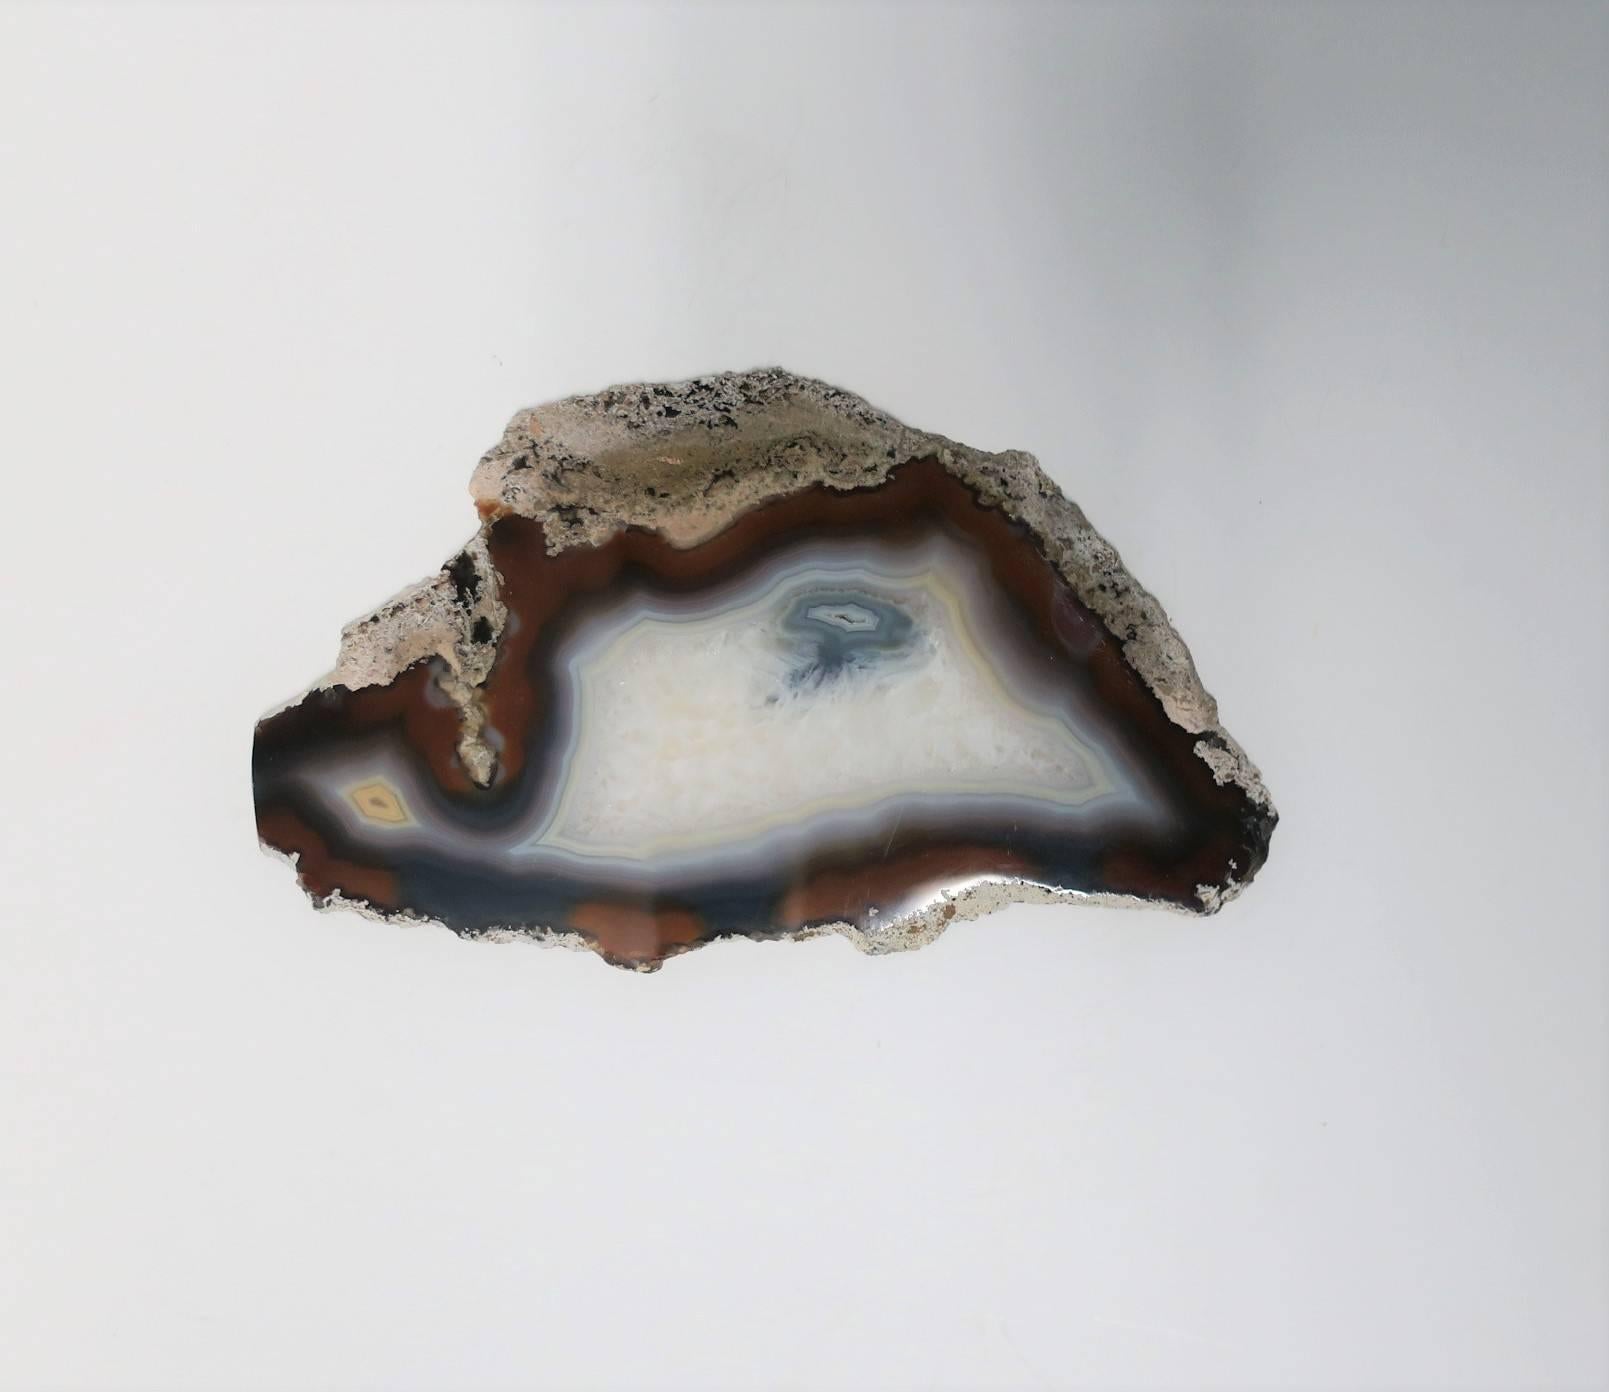 A beautiful blue and white agate onyx decorative object slab or tray. Piece can work well as a standalone decorative object, display piece, or tray to hold small items (jewelry in image #3.) Colors include: white, cream, blue and brown hues. Piece